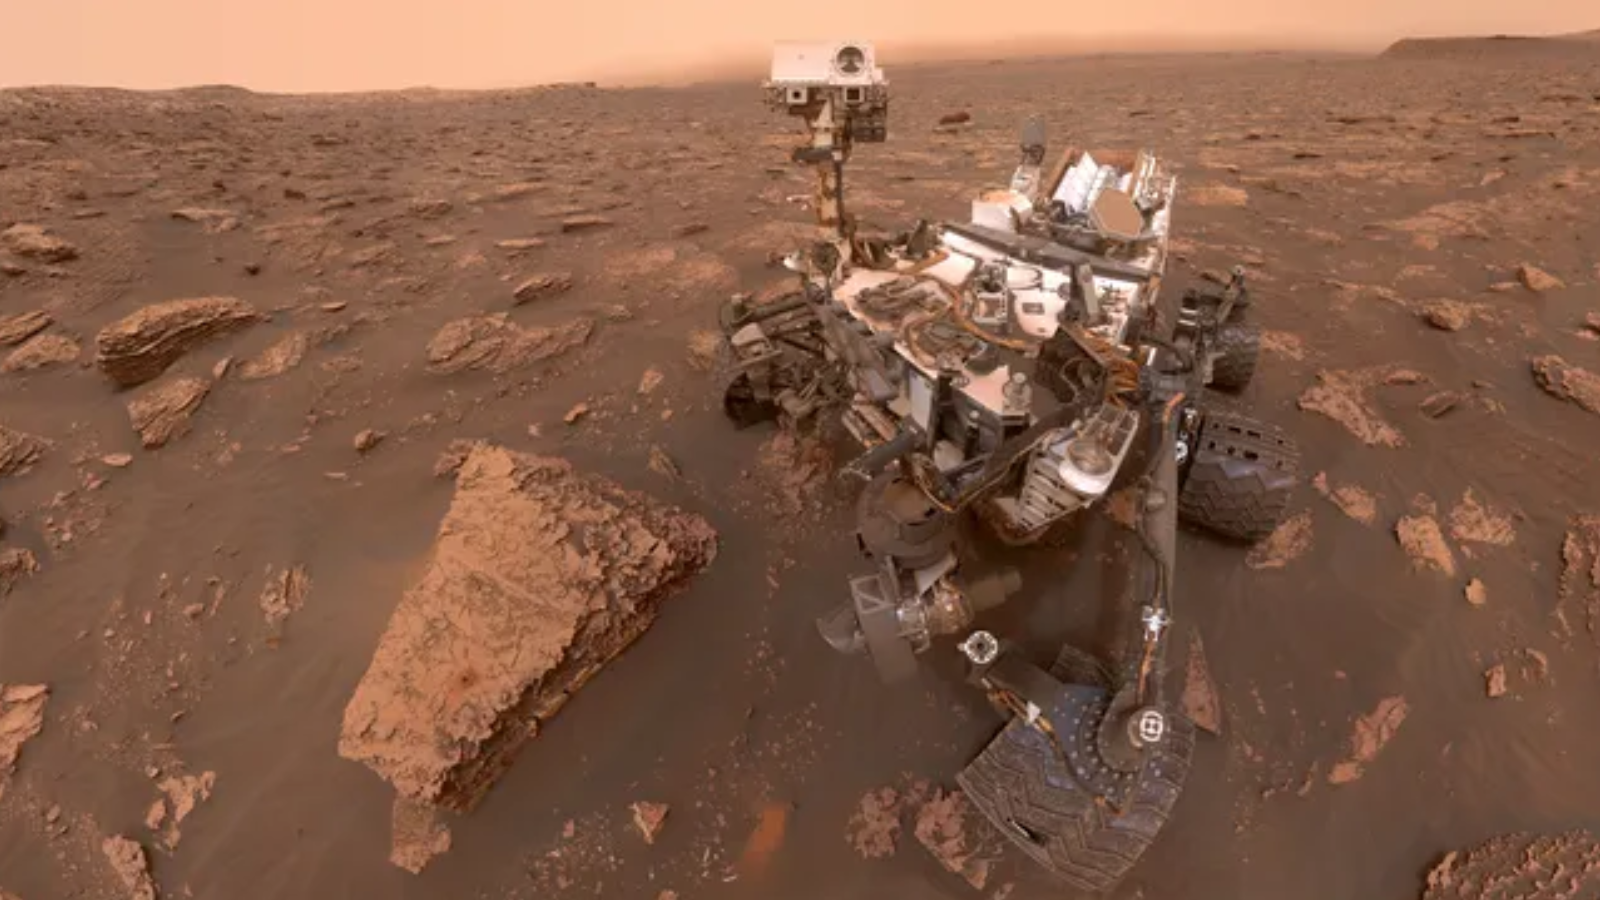 NASA’s Curiosity rover films from dawn to dusk on Mars during downtime (video) Space